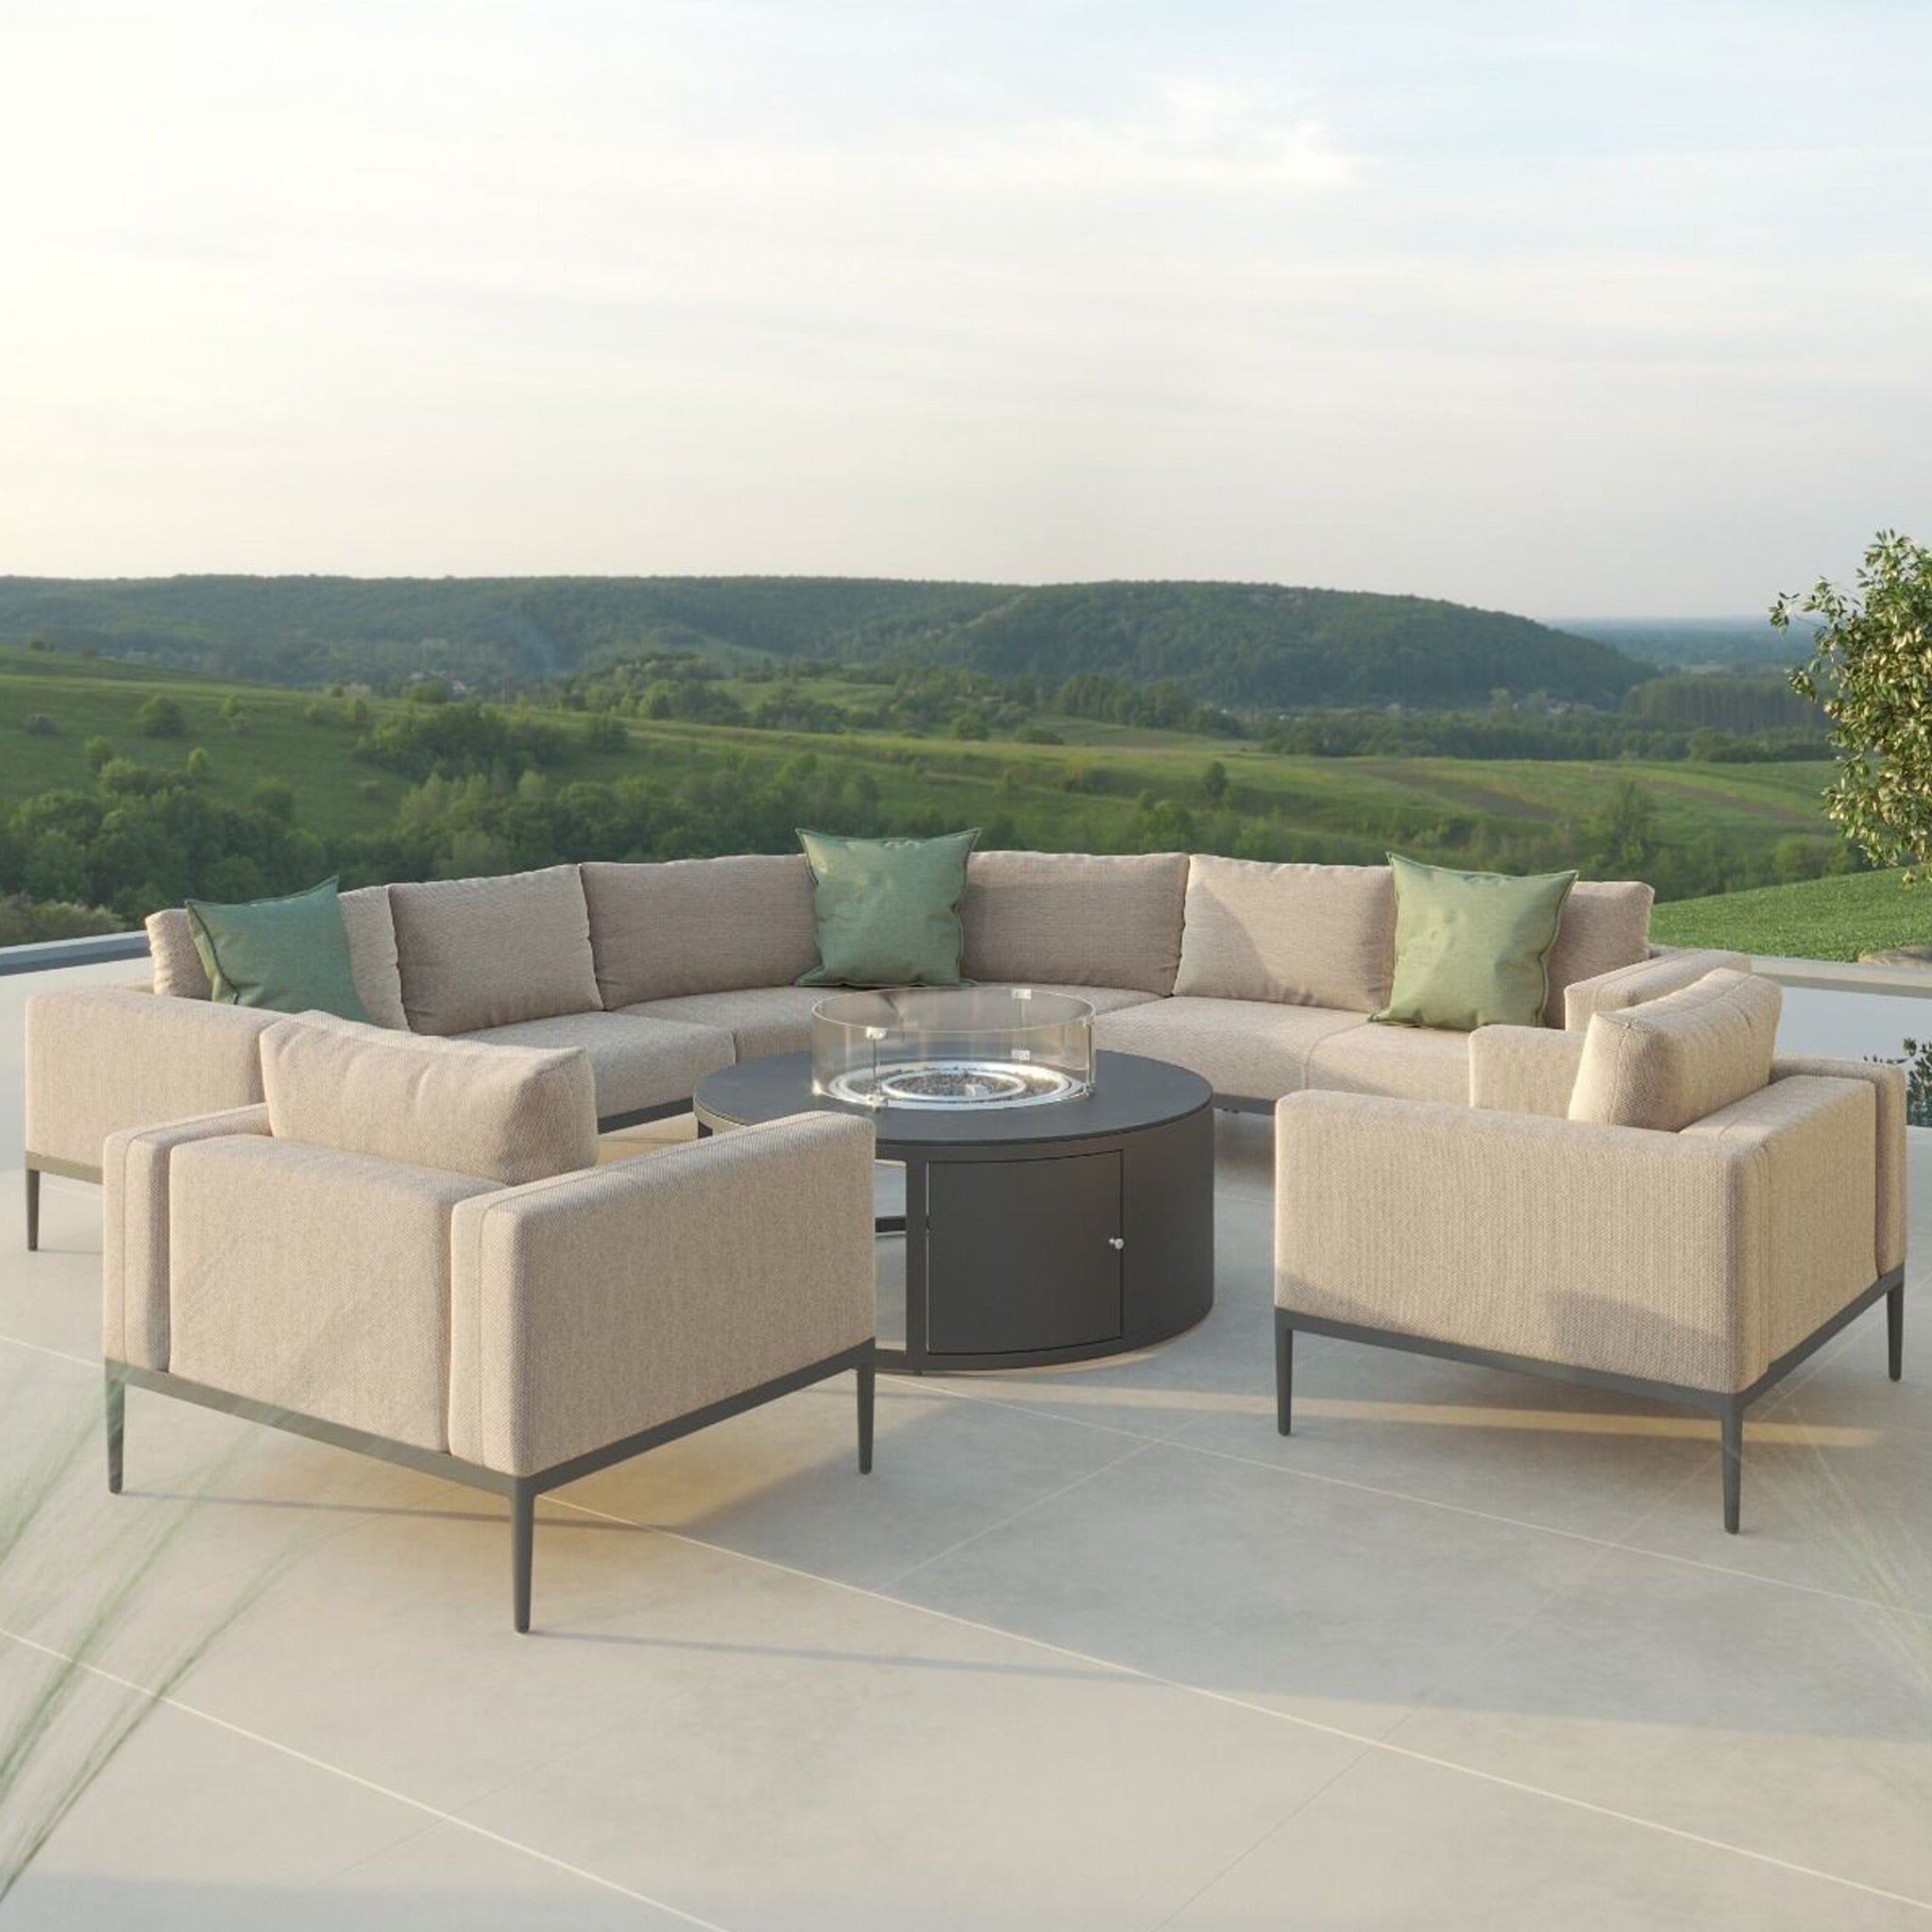 Eve Grande Outdoor Corner Sofa Group With Round Fire Pit Roseland